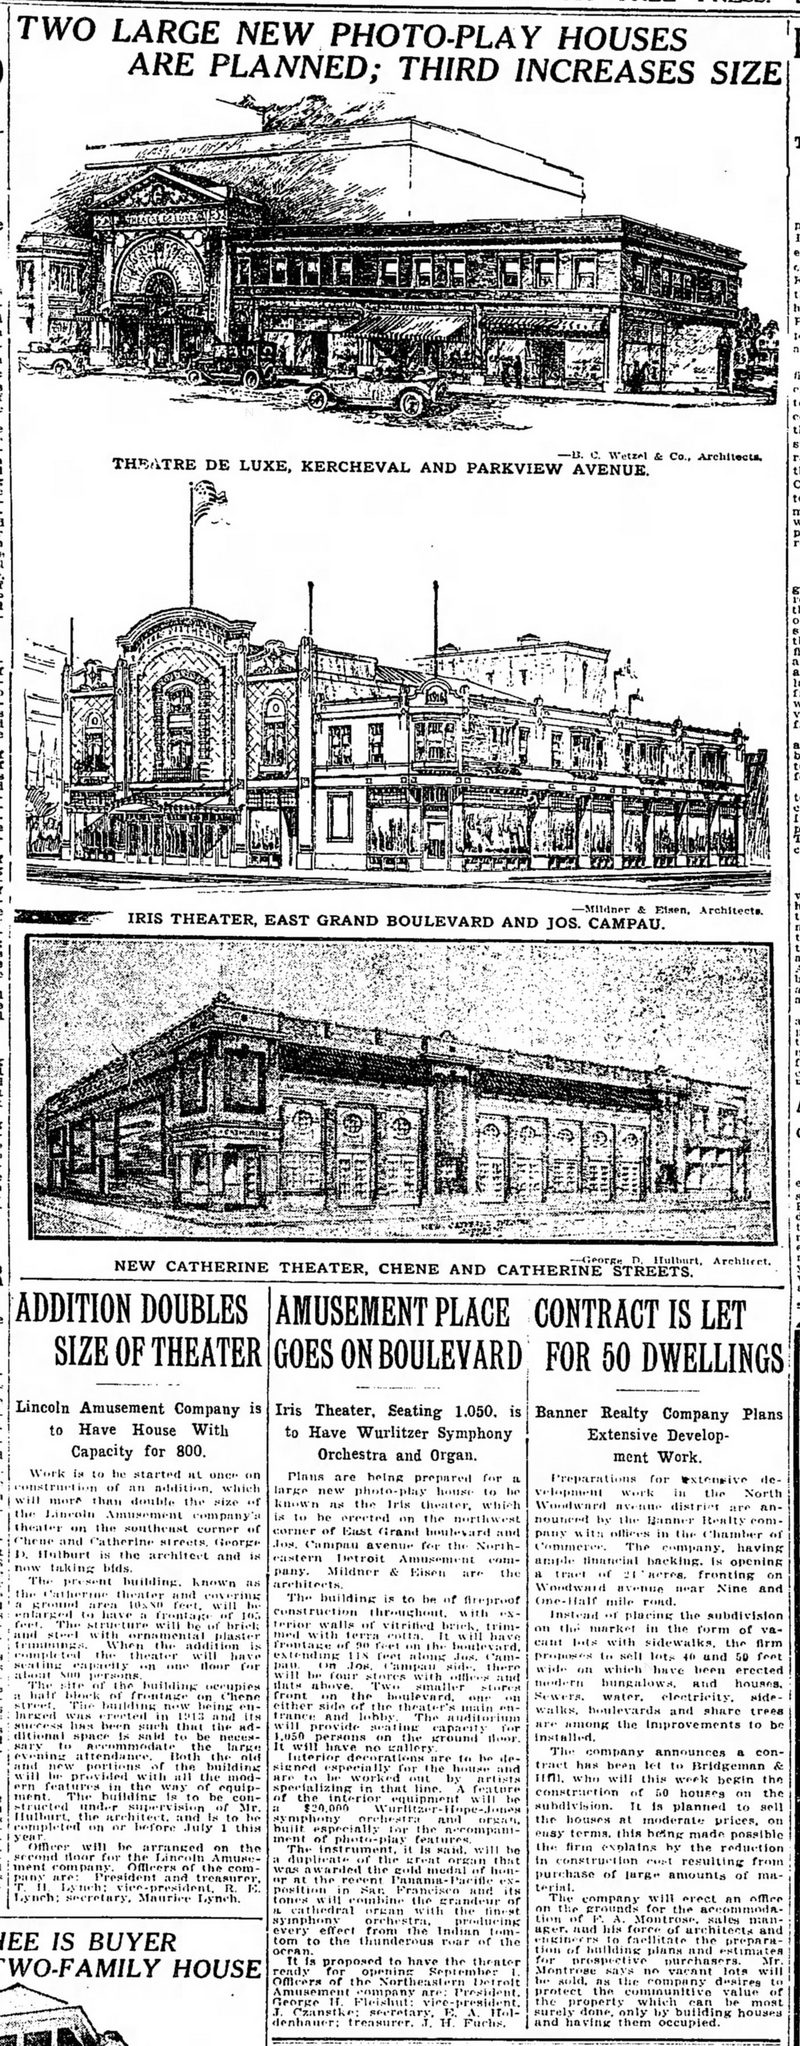 Catherine Theatre - Mar 19 1916 Article (newer photo)